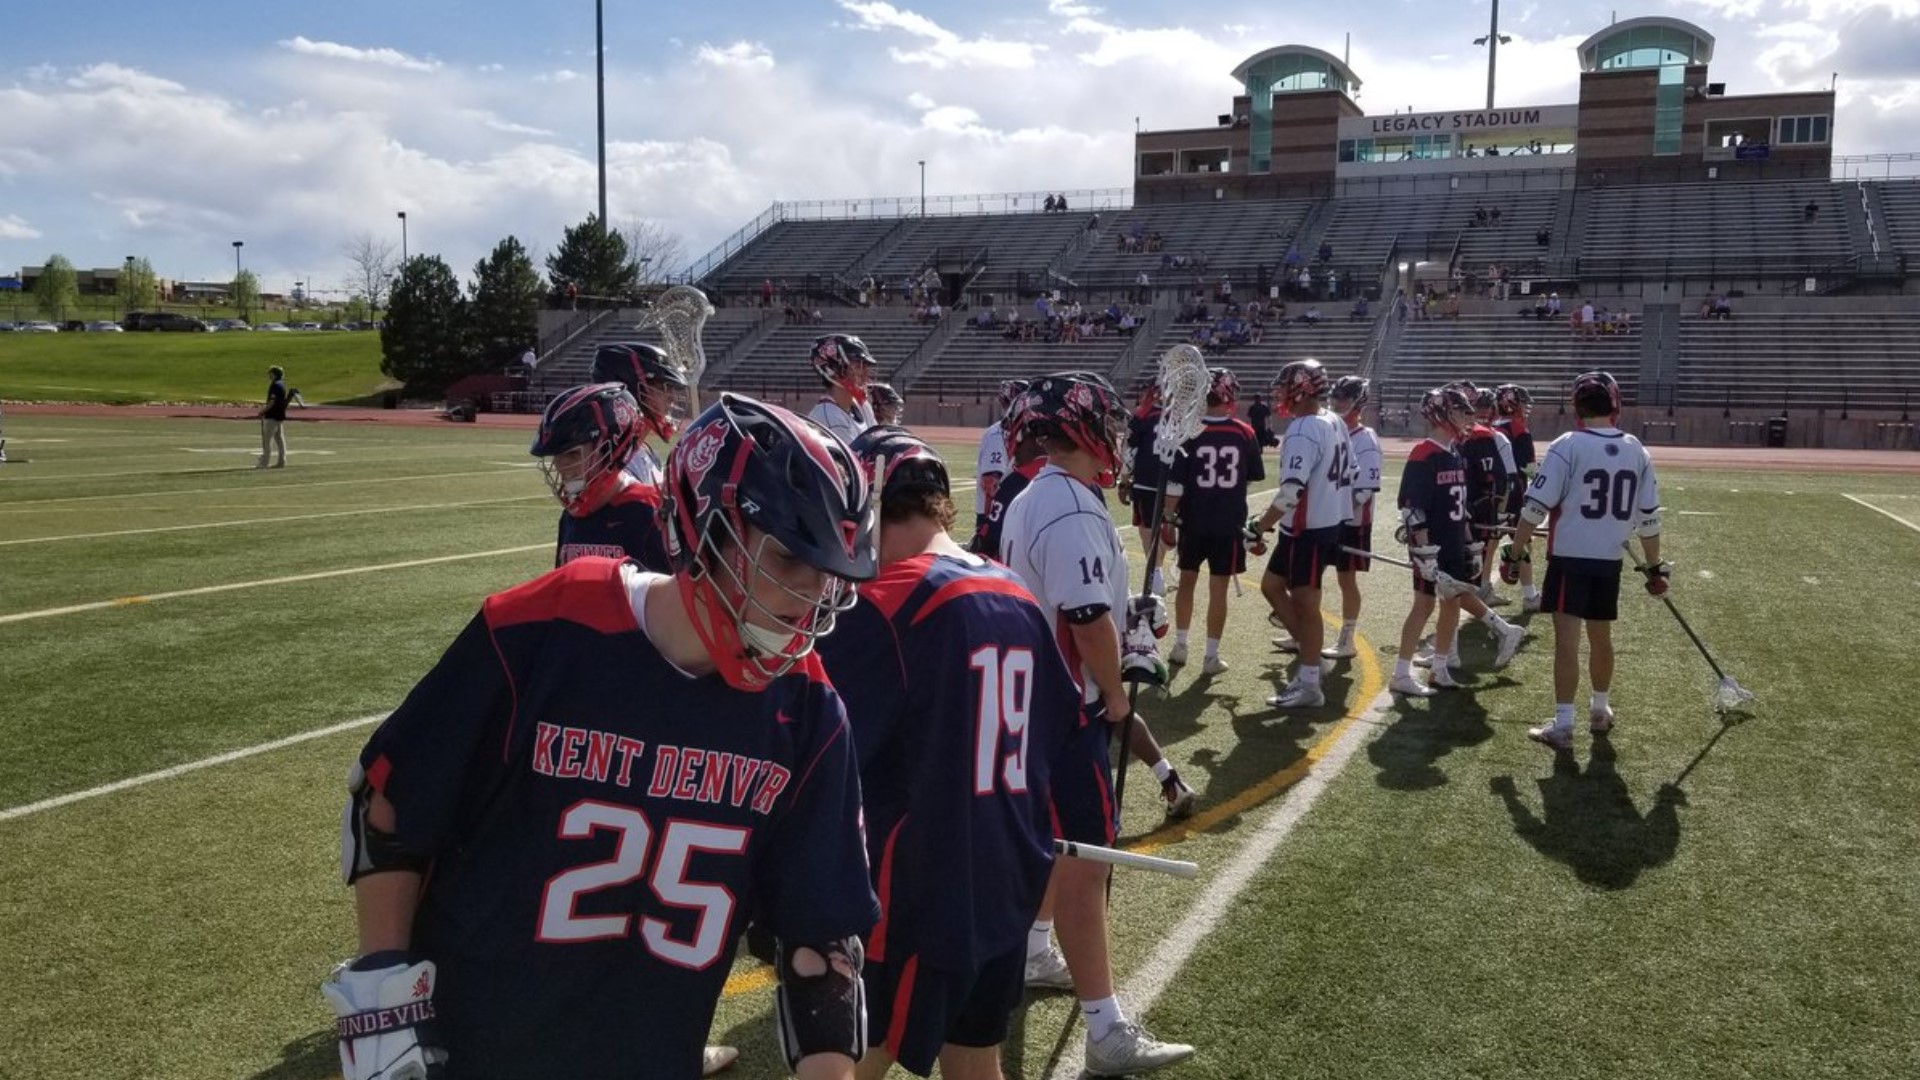 Kent Denver and Cherry Creek won their Class 5A boys lacrosse semifinal games at Legacy Stadium on Wednesday night.